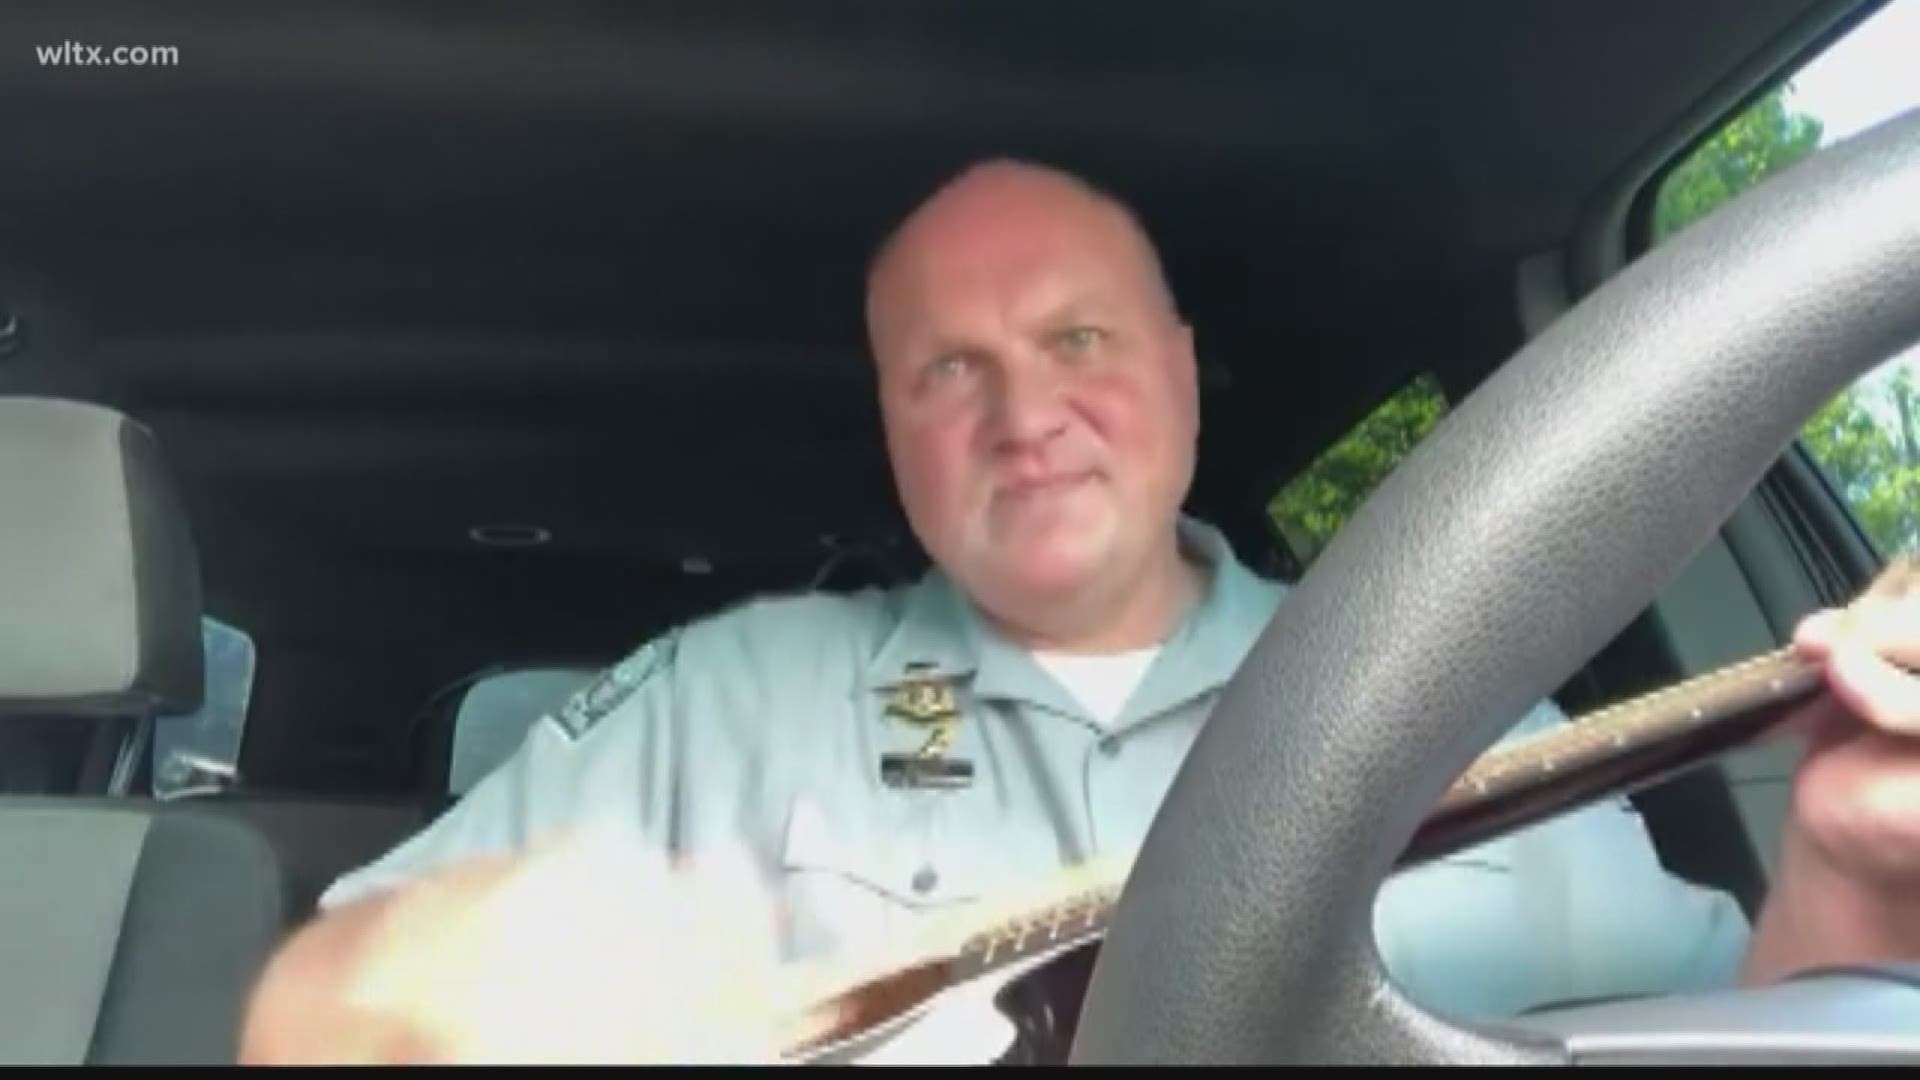 Lt. Bob Beres, who became known for his use of emojis, is retiring from the South Carolina Highway Patrol.